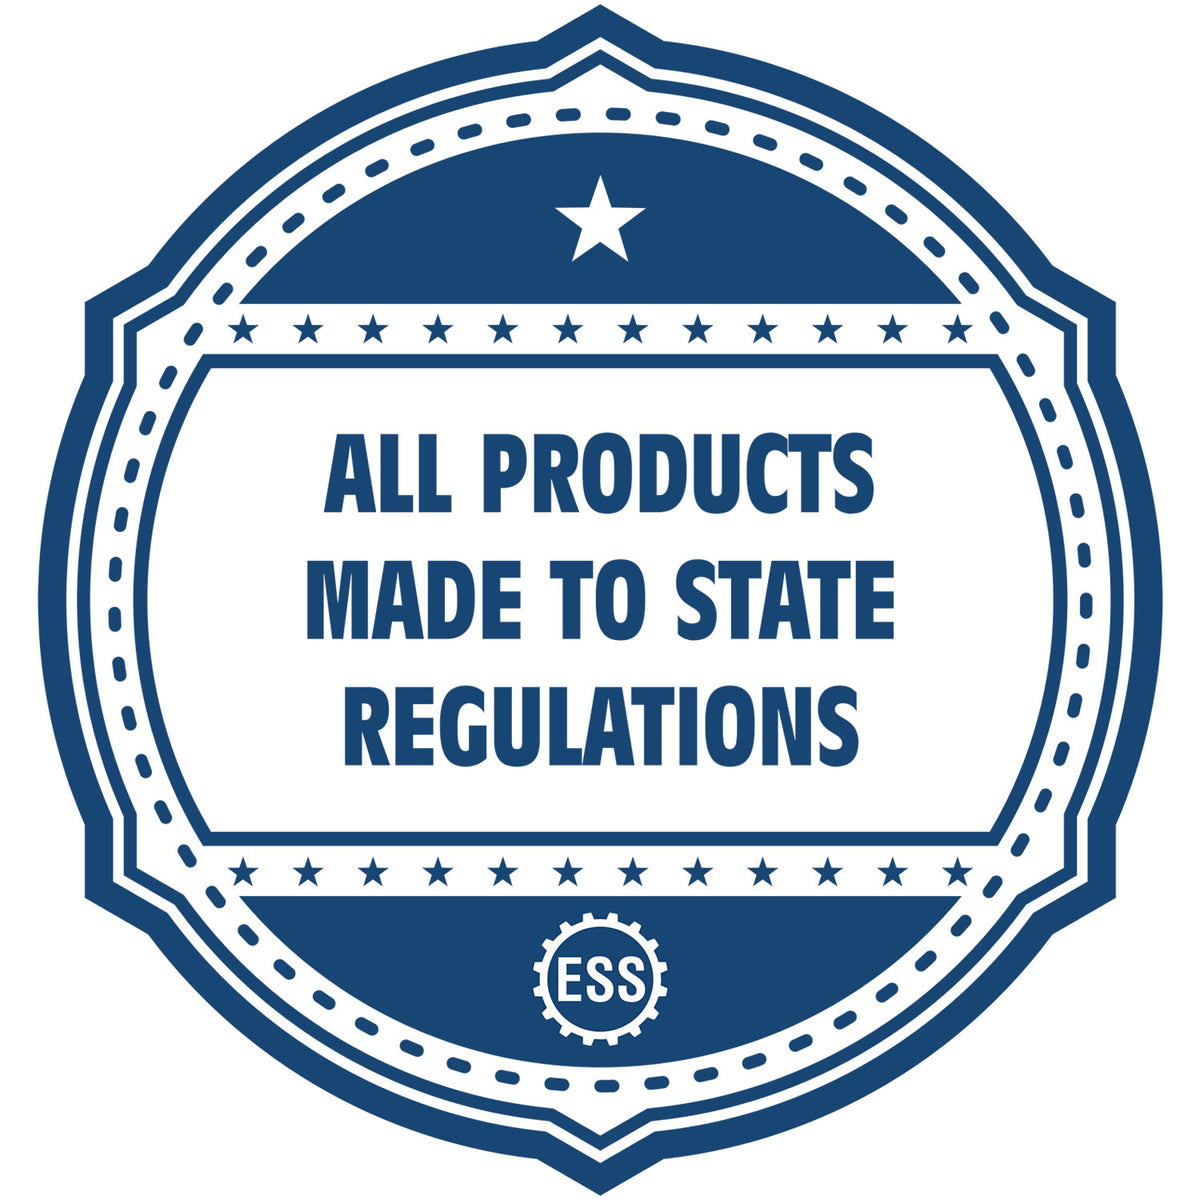 A blue icon or badge for the Slim Pre-Inked Tennessee Professional Geologist Seal Stamp showing that this product is made in compliance with state regulations.